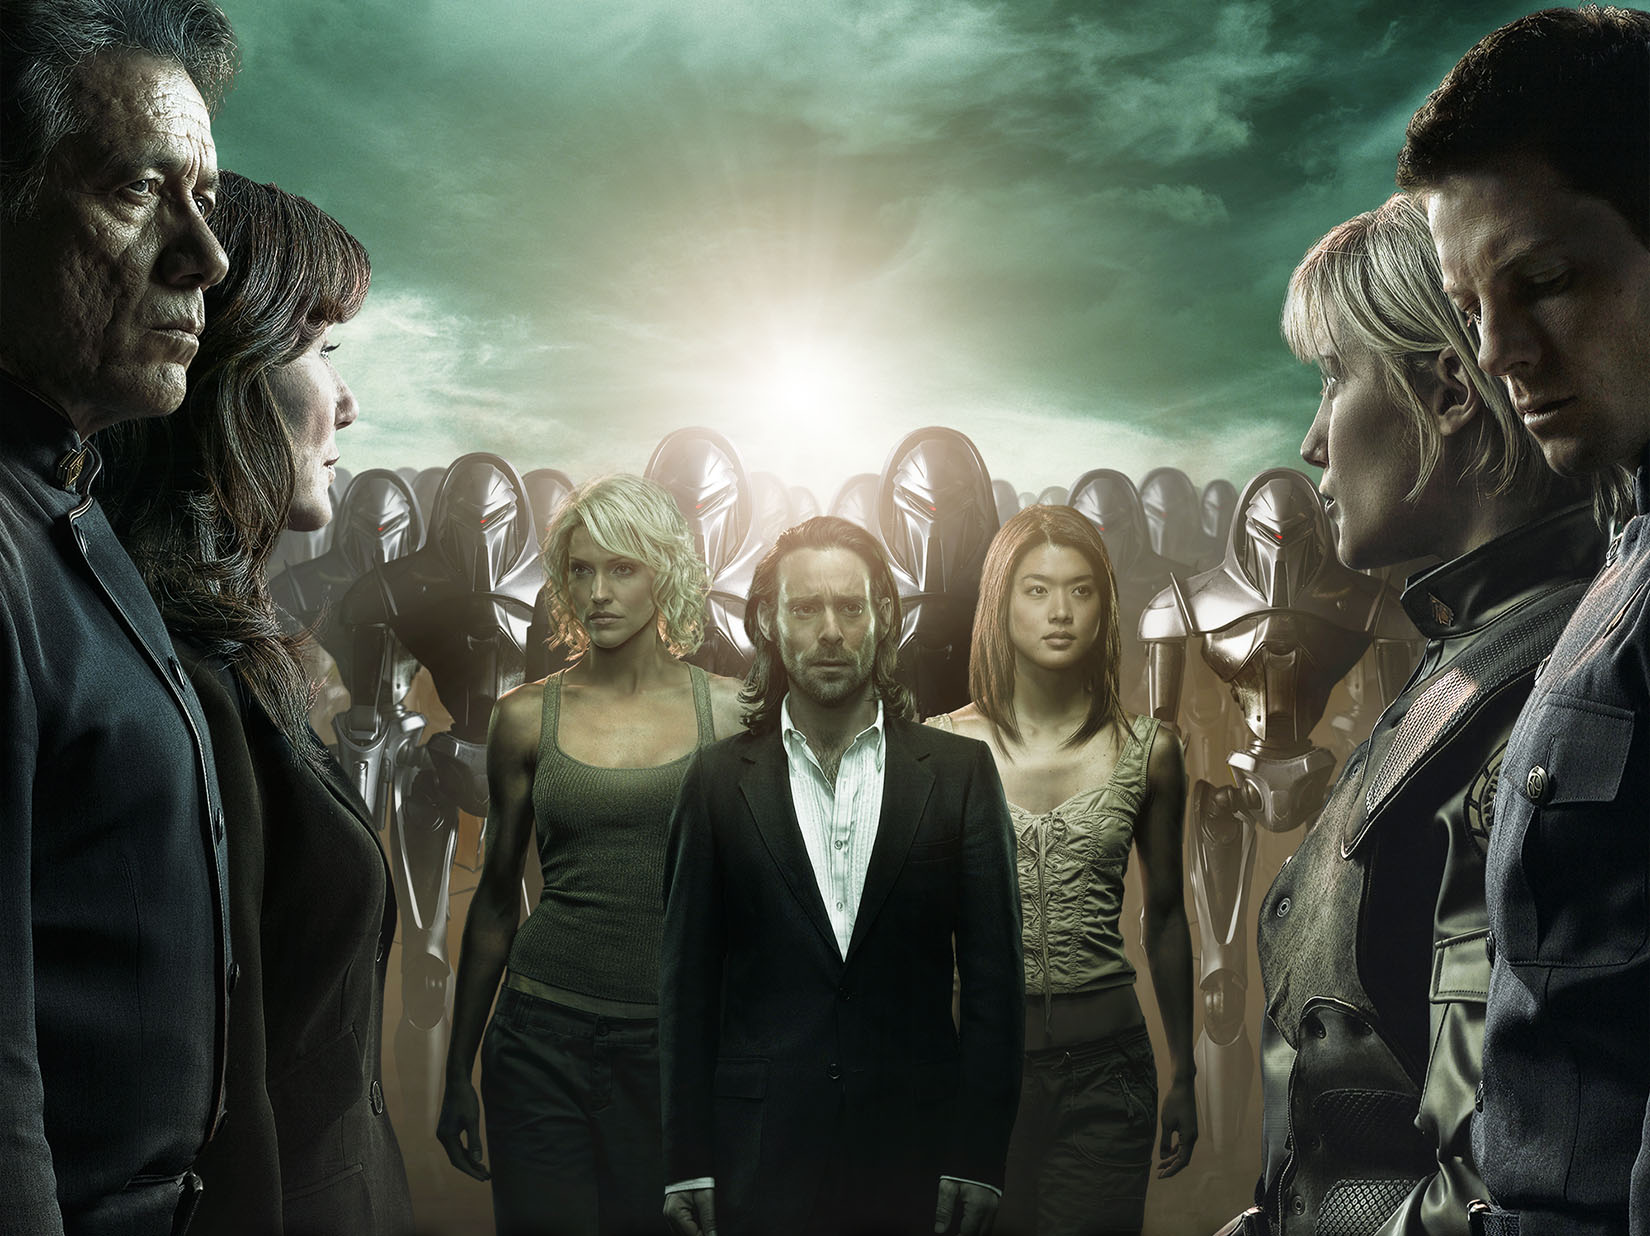 Group portrait of Battlestar Galactica characters, including Number Six, Adama, Thrace, Roslin, Baltar, Lee, and Boomer.